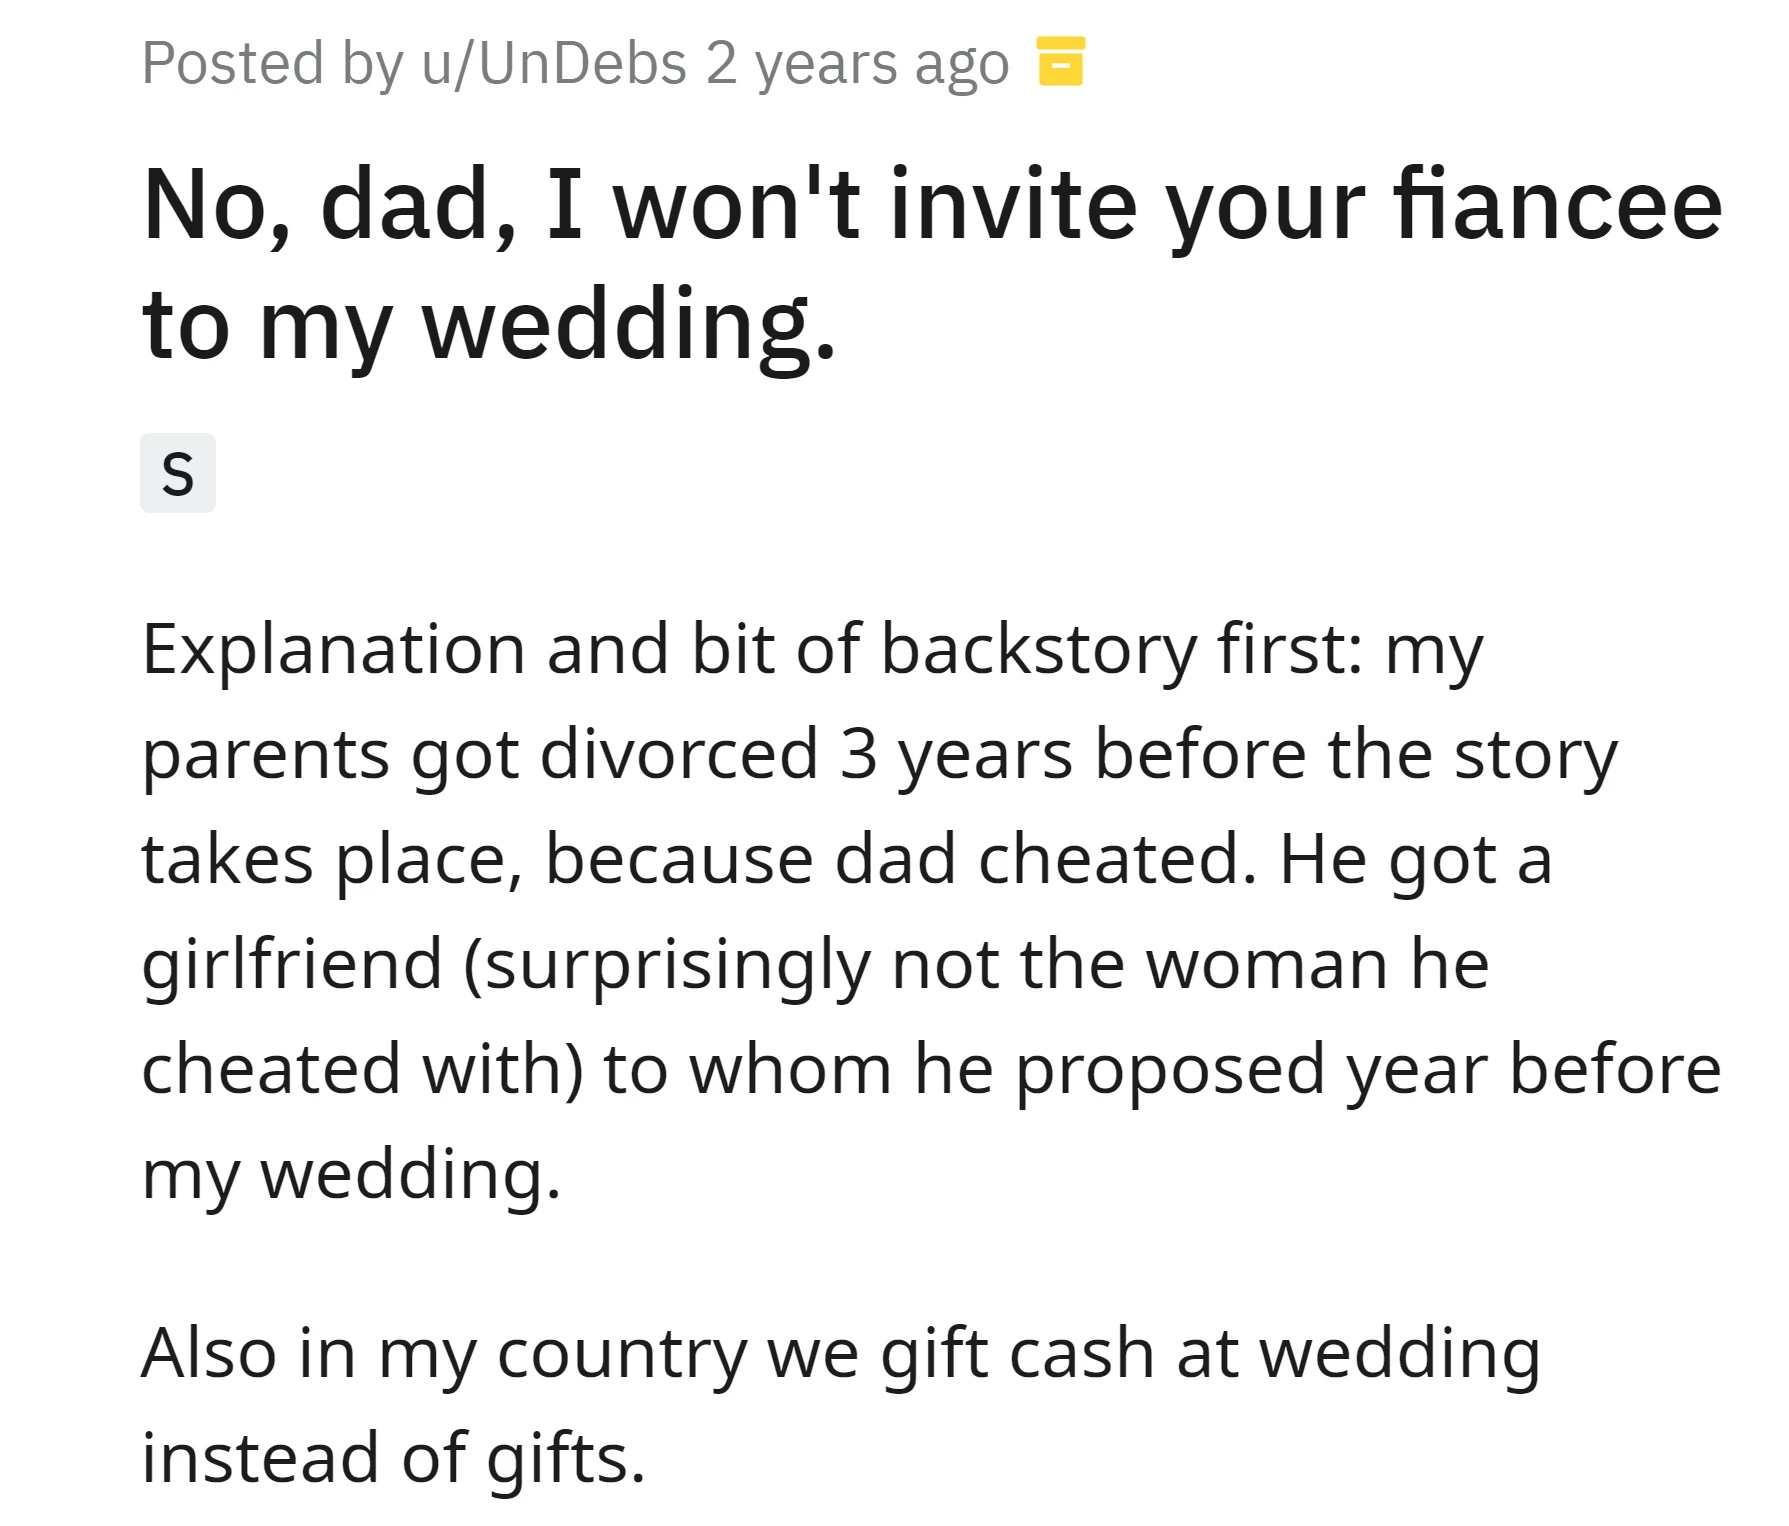 In OP's country, people gift cash at wedding instead of gifts